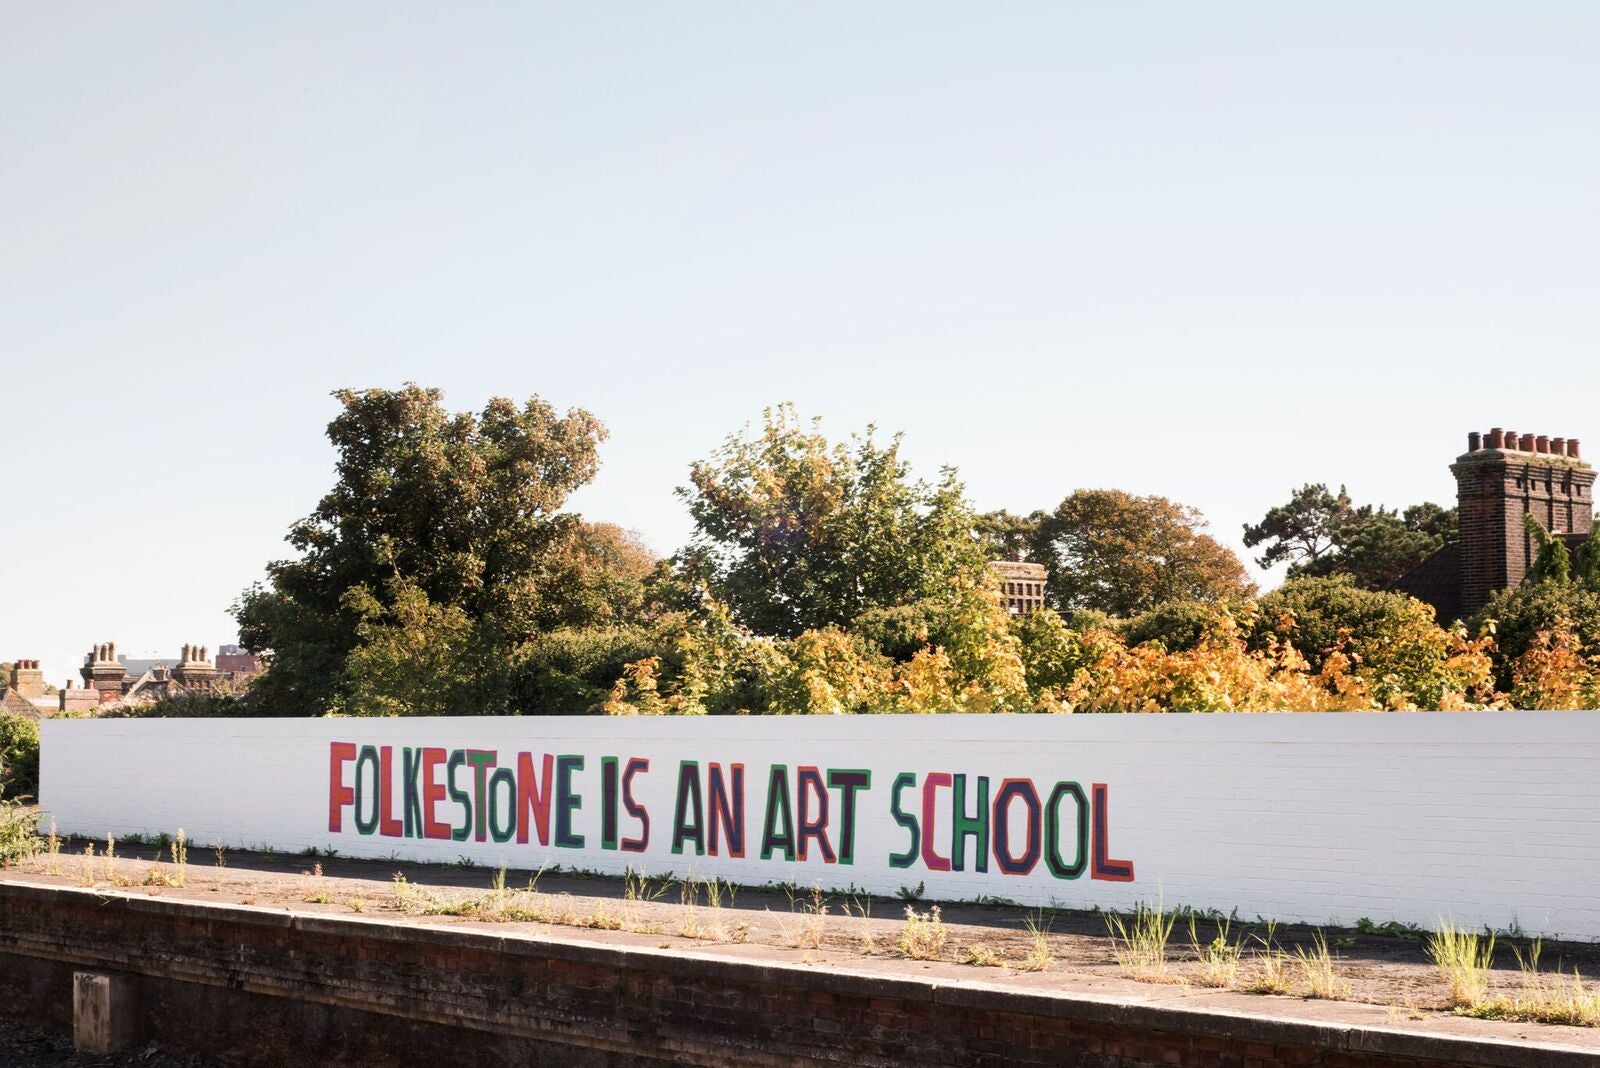 The ‘Folkestone is an art school’ sign sums up the town’s creative revival